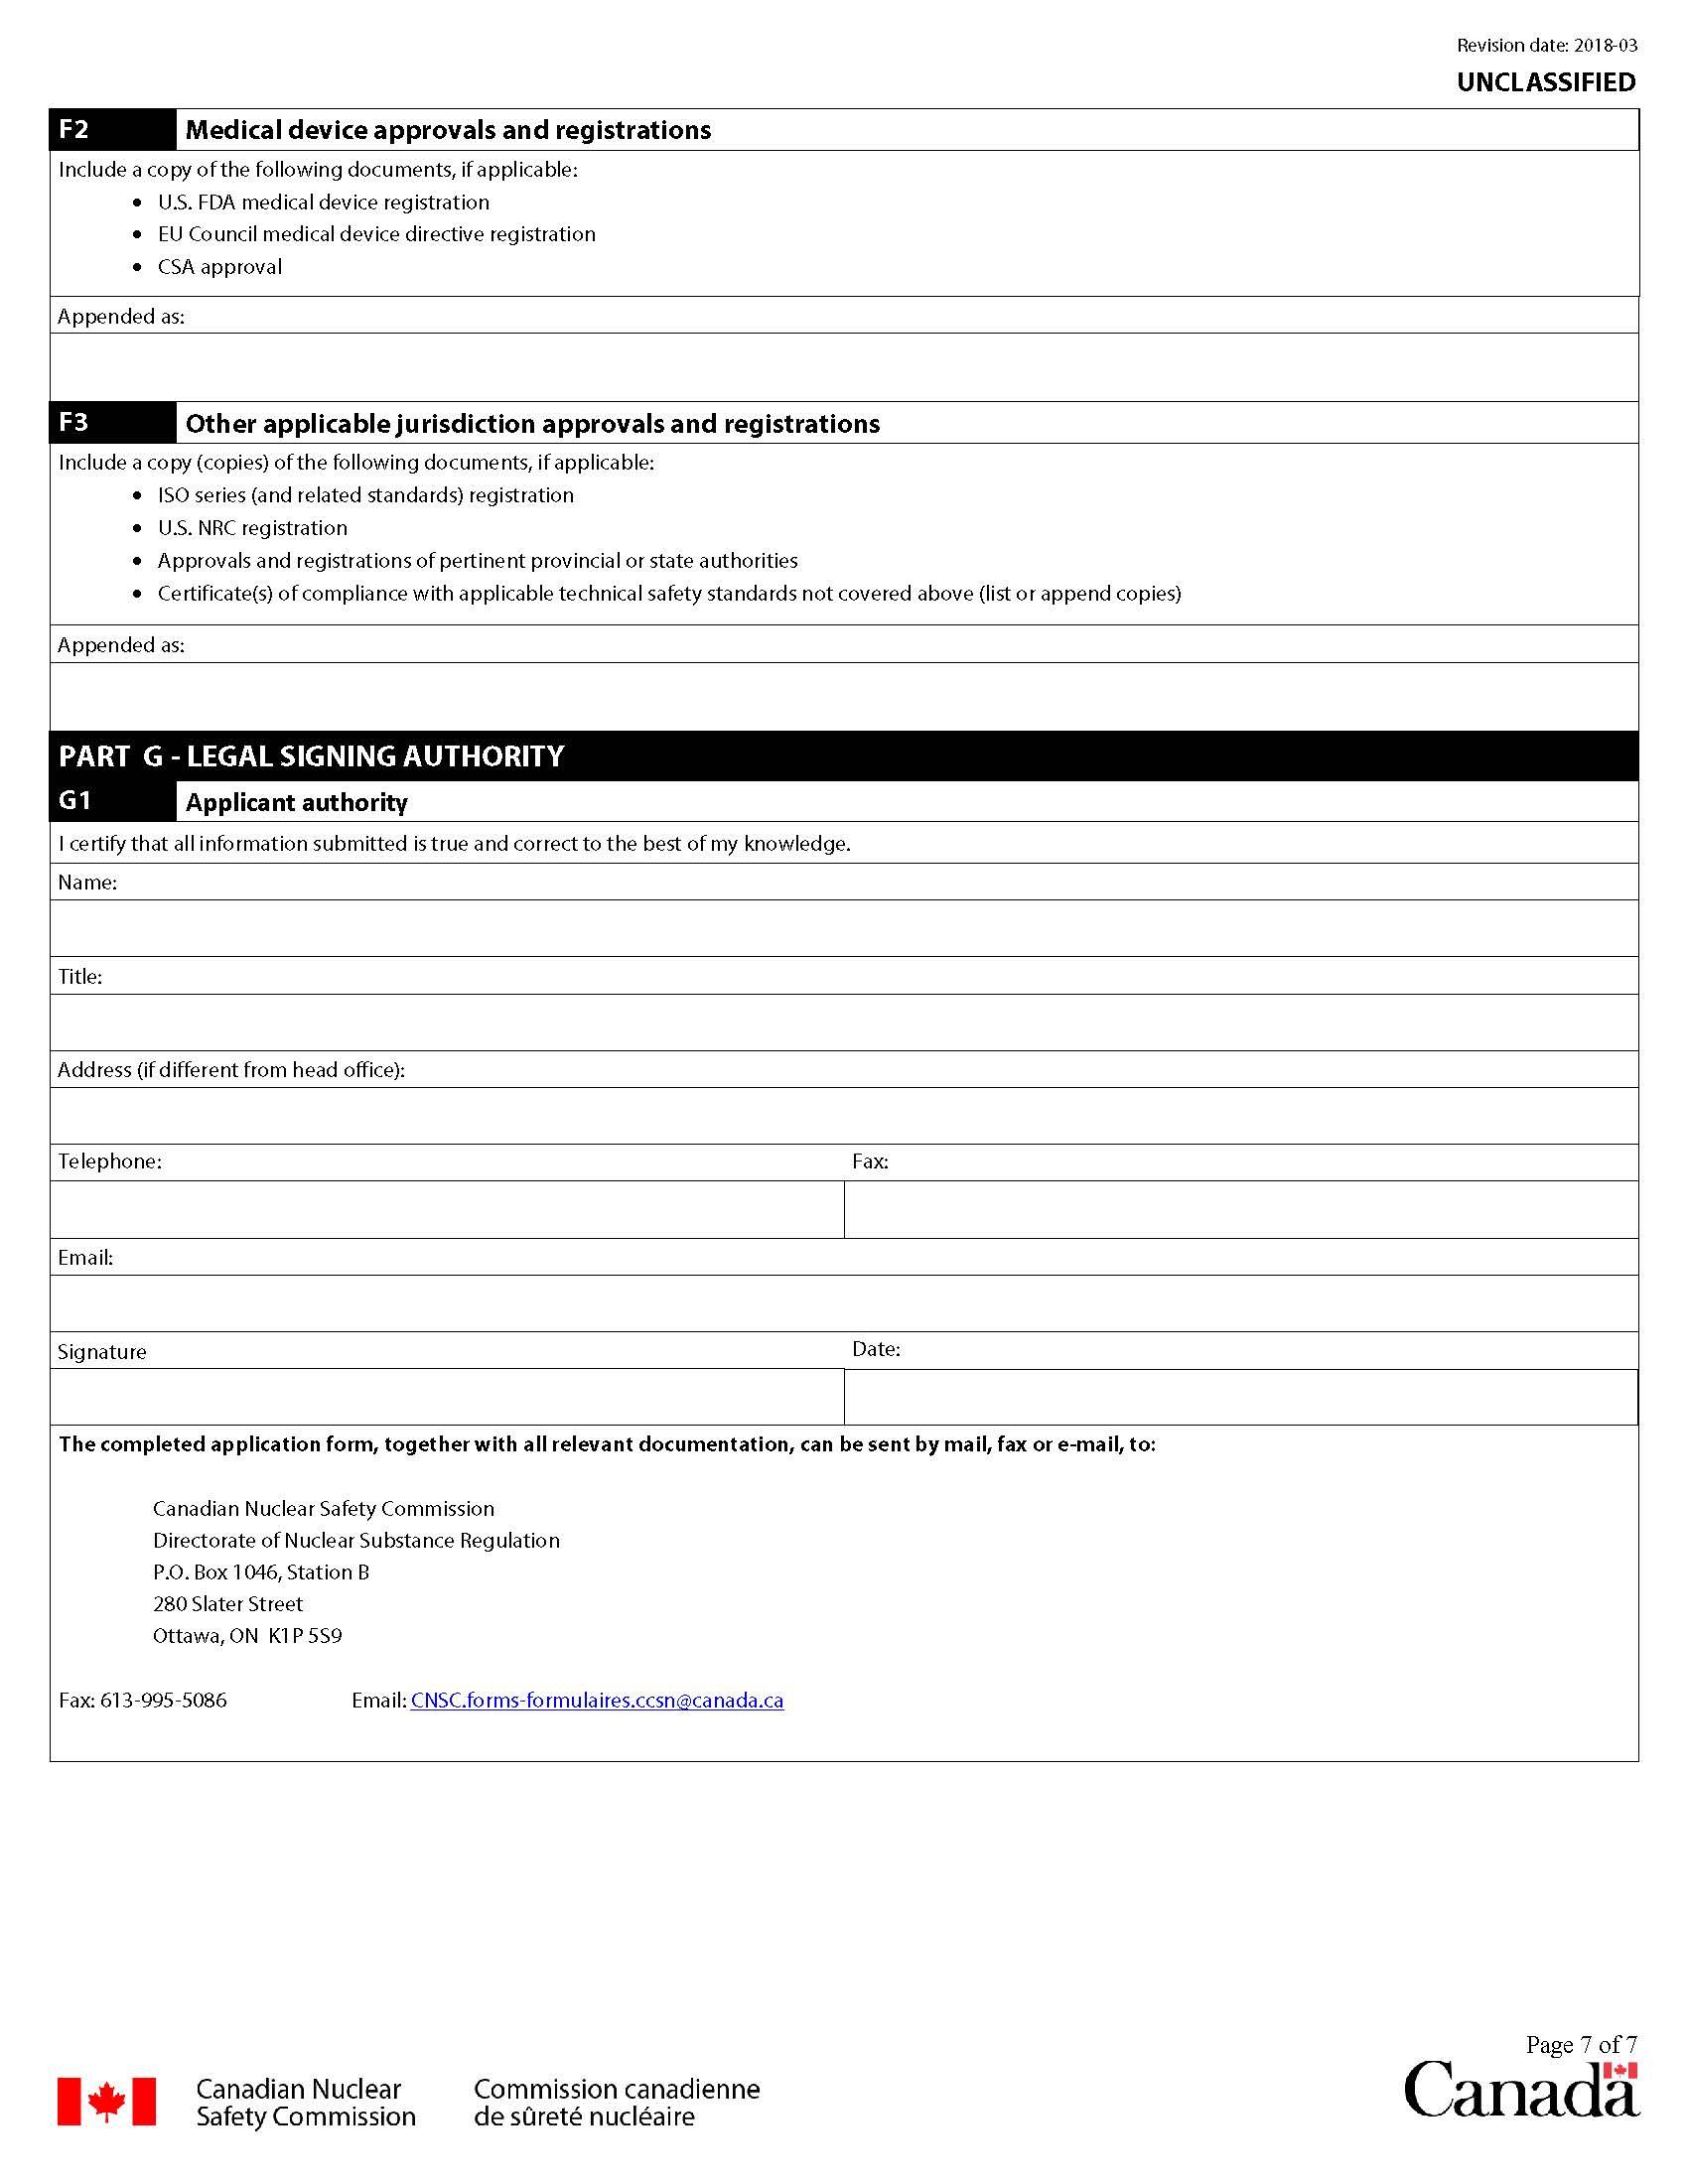 Application form for certification of radiation devices or Class II prescribed equipment: page 7